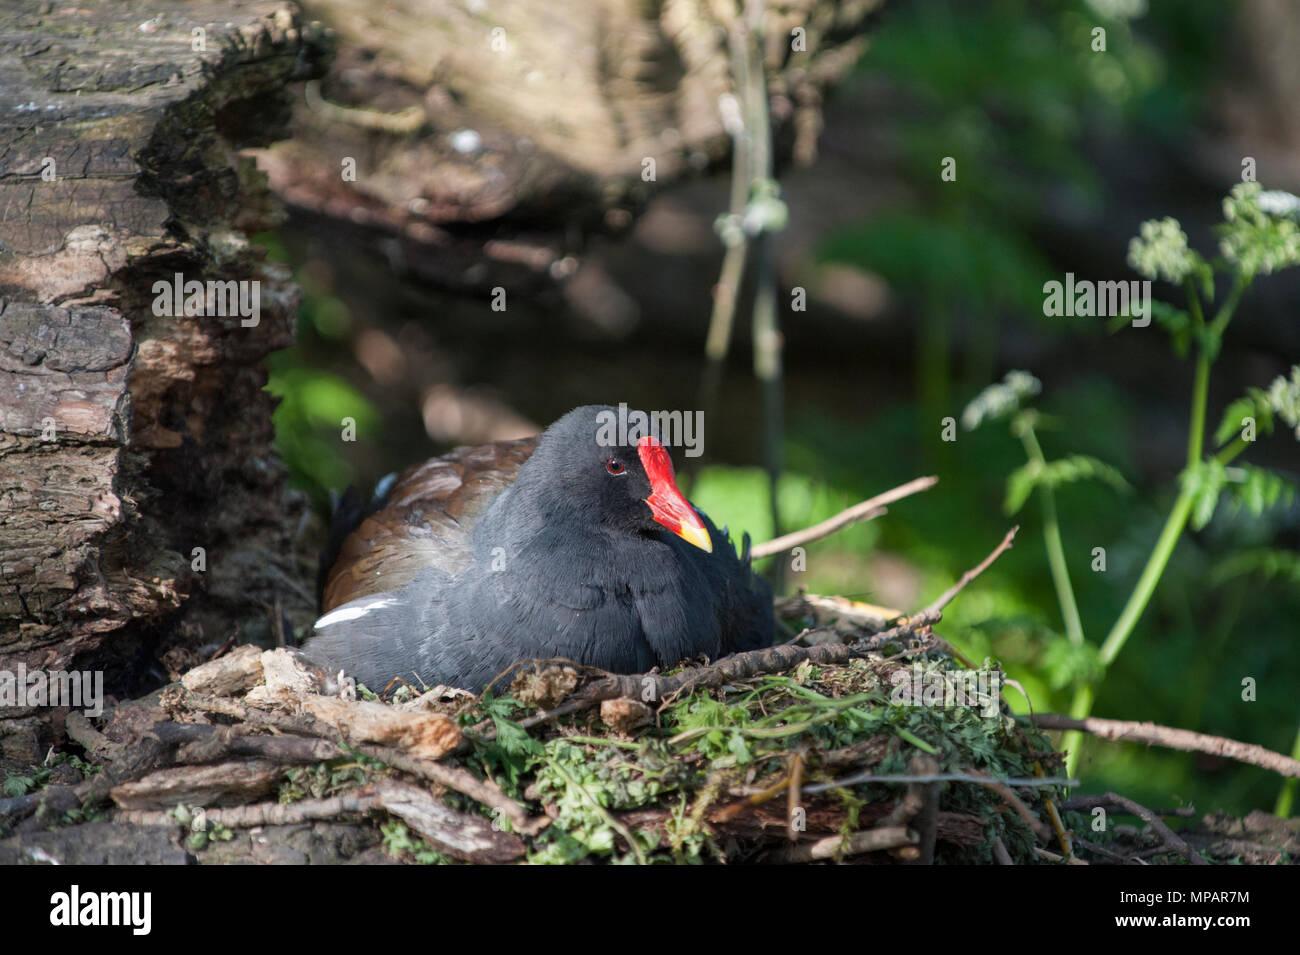 nesting Common Moorhen,(Gallinula chloropus), also known as the waterhen or the swamp chicken, Regents Canal, London, United Kingdom, British Isles Stock Photo